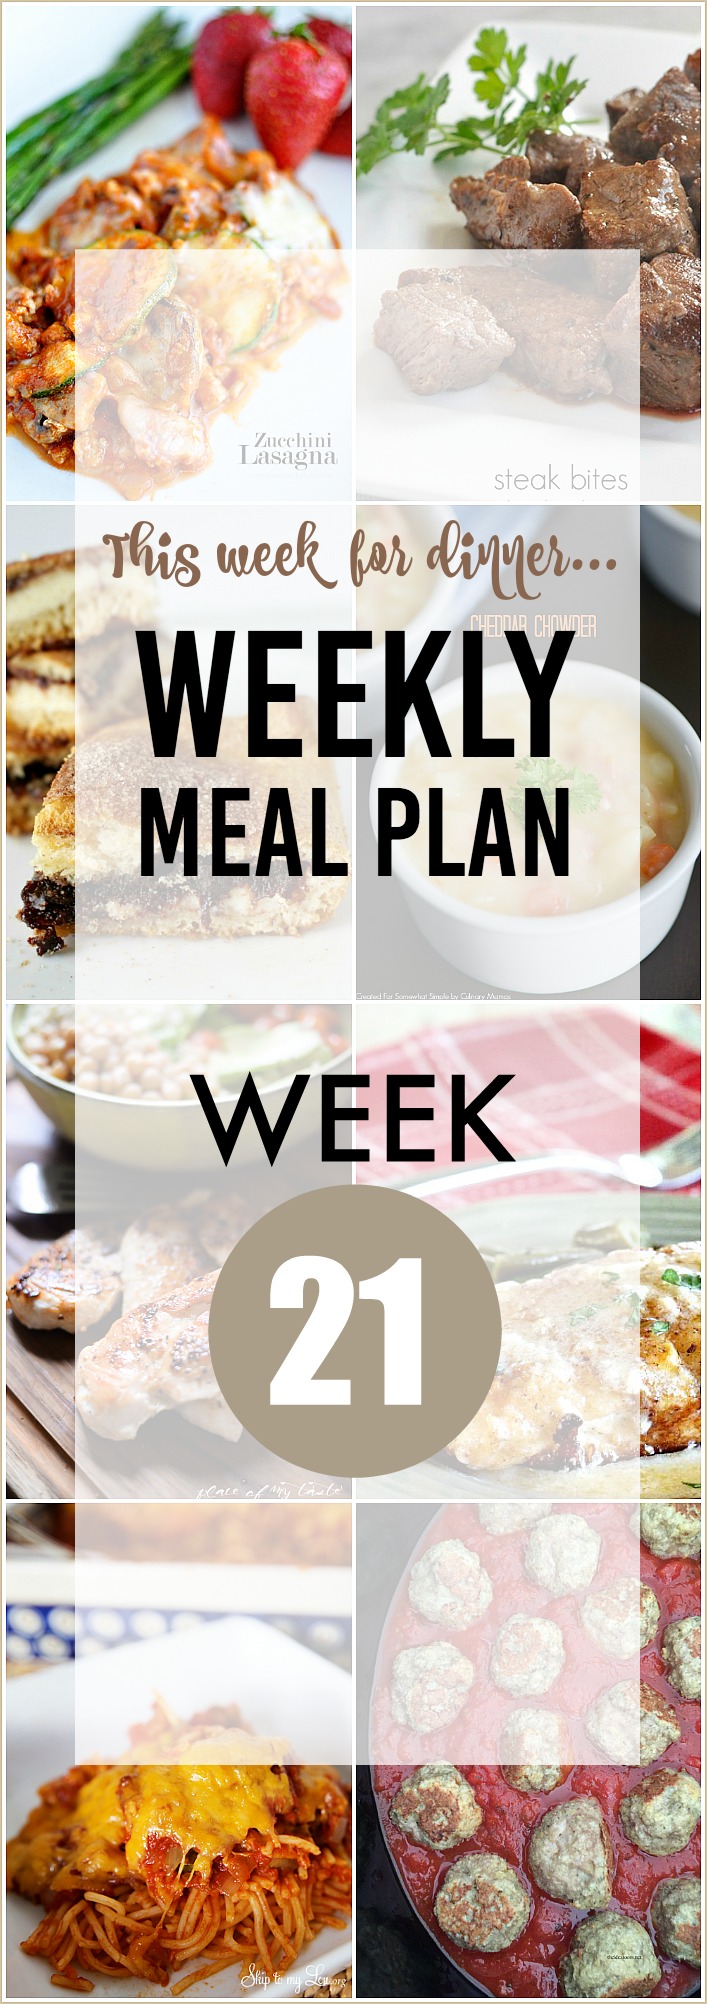 WEEKLY MEAL PLAN 21 the36thavenue